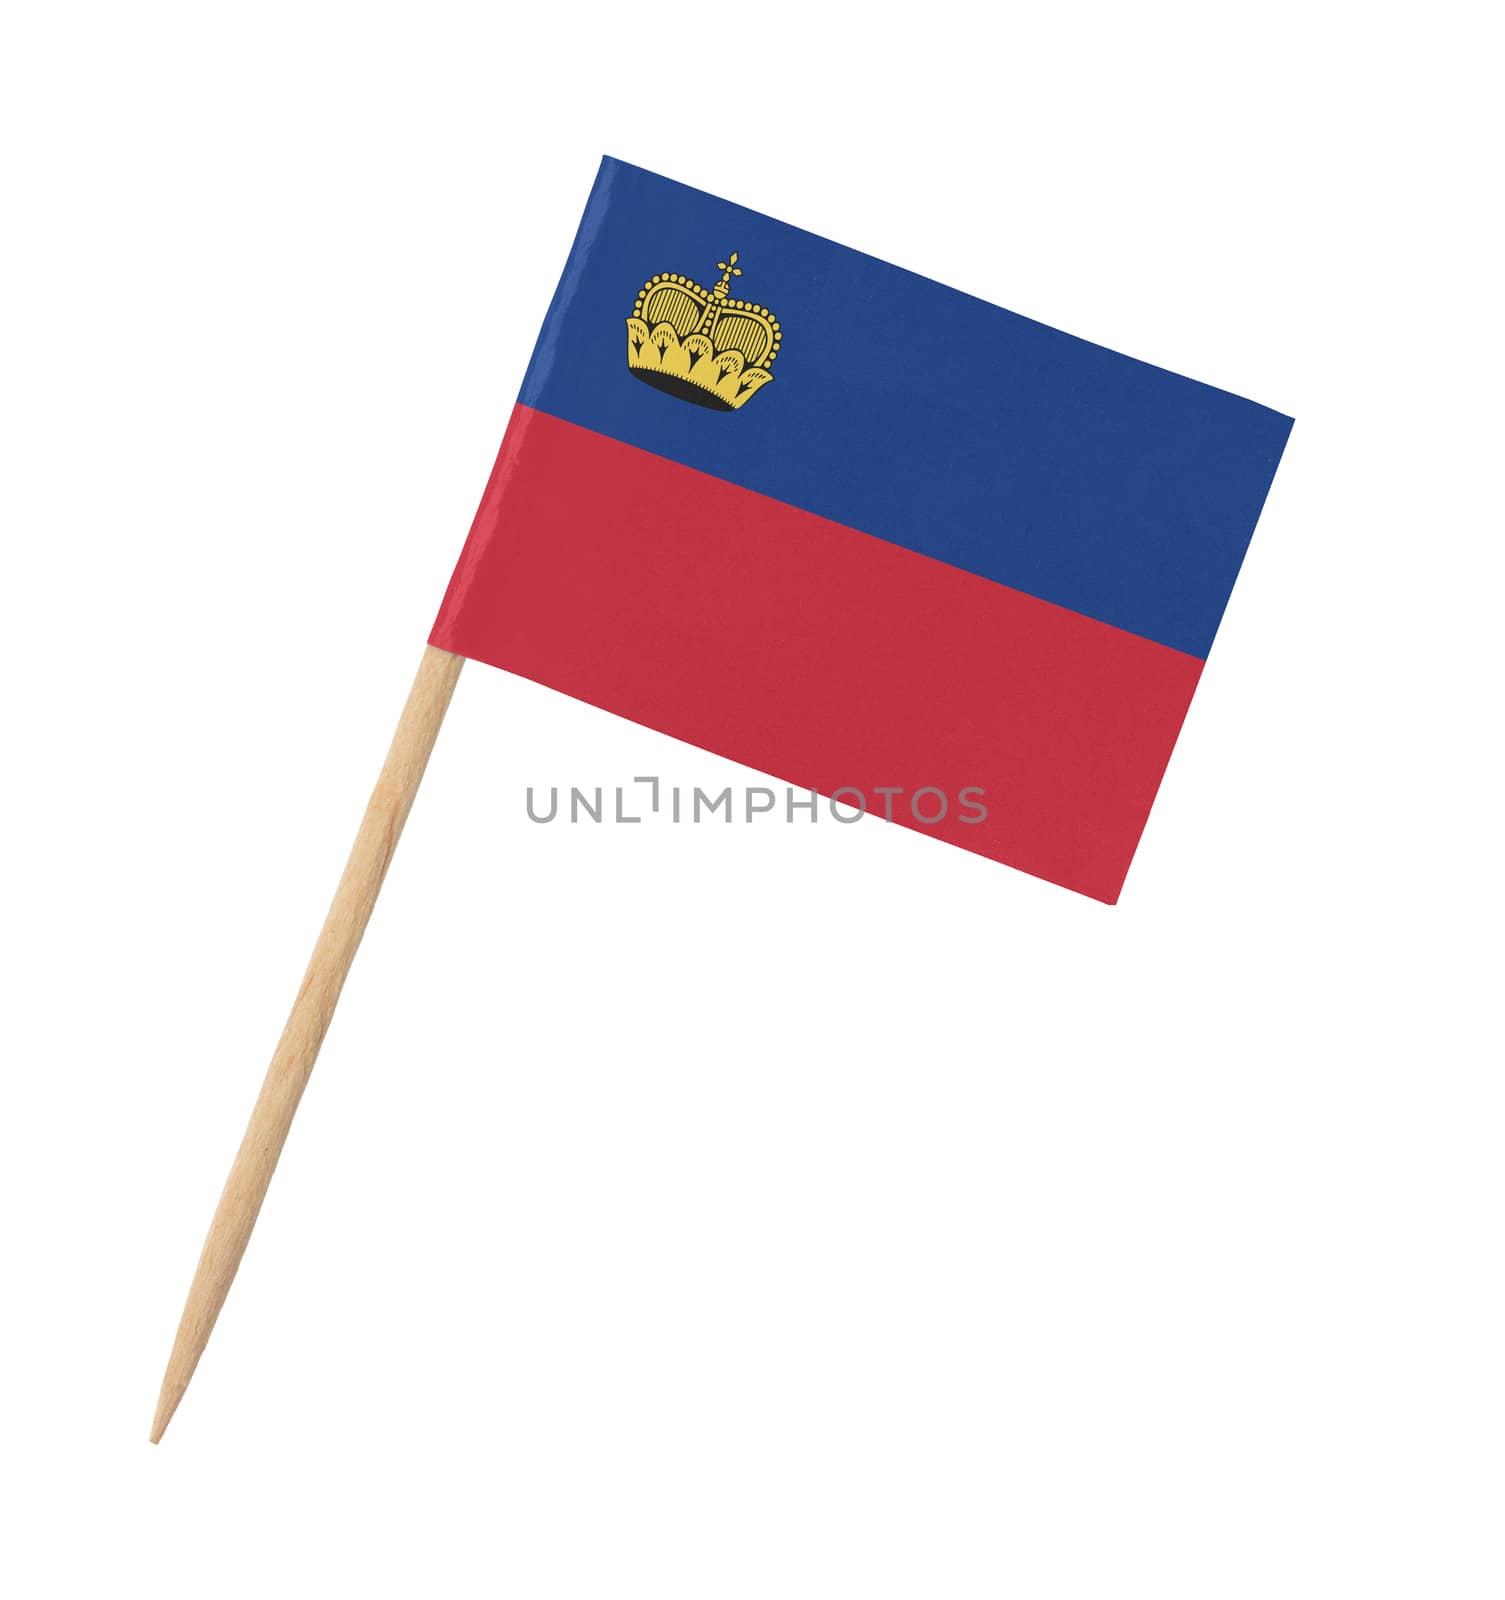 Small paper flag of Liechtenstein on wooden stick, isolated on white